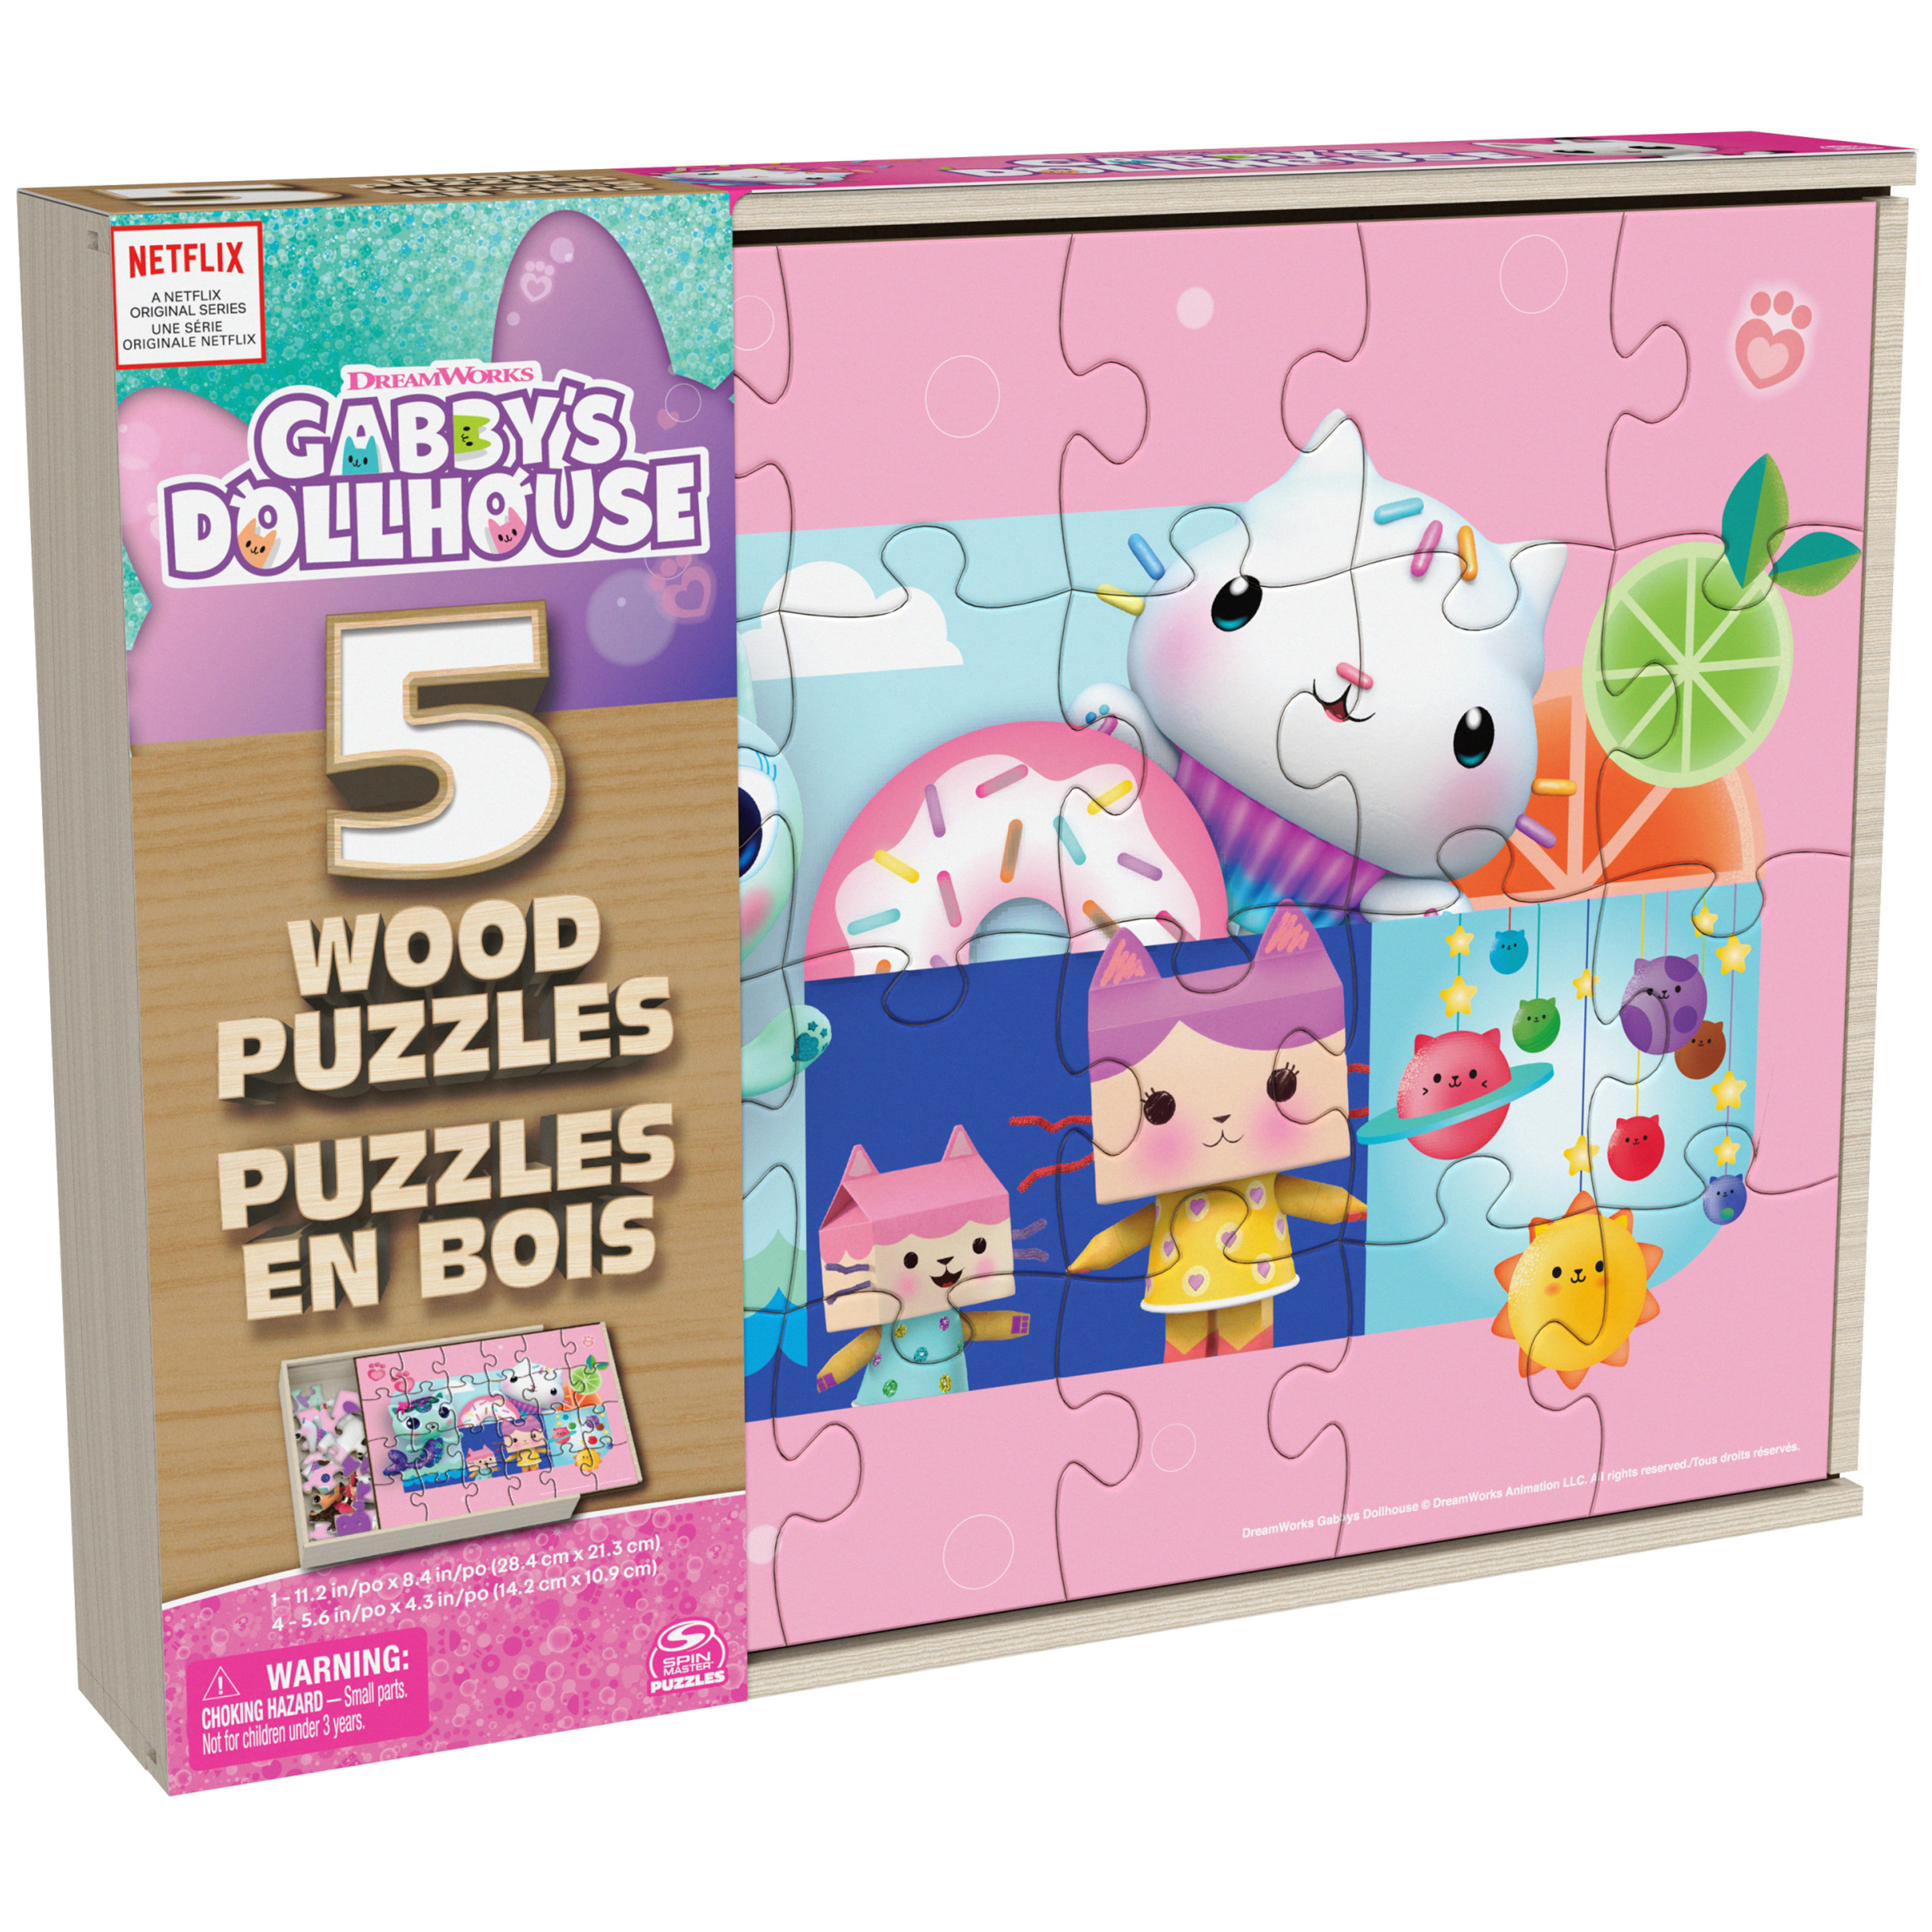 Gabby’s Dollhouse, 5 Wood Puzzles with Storage Box, for Kids Ages 4 and up - image 3 of 7